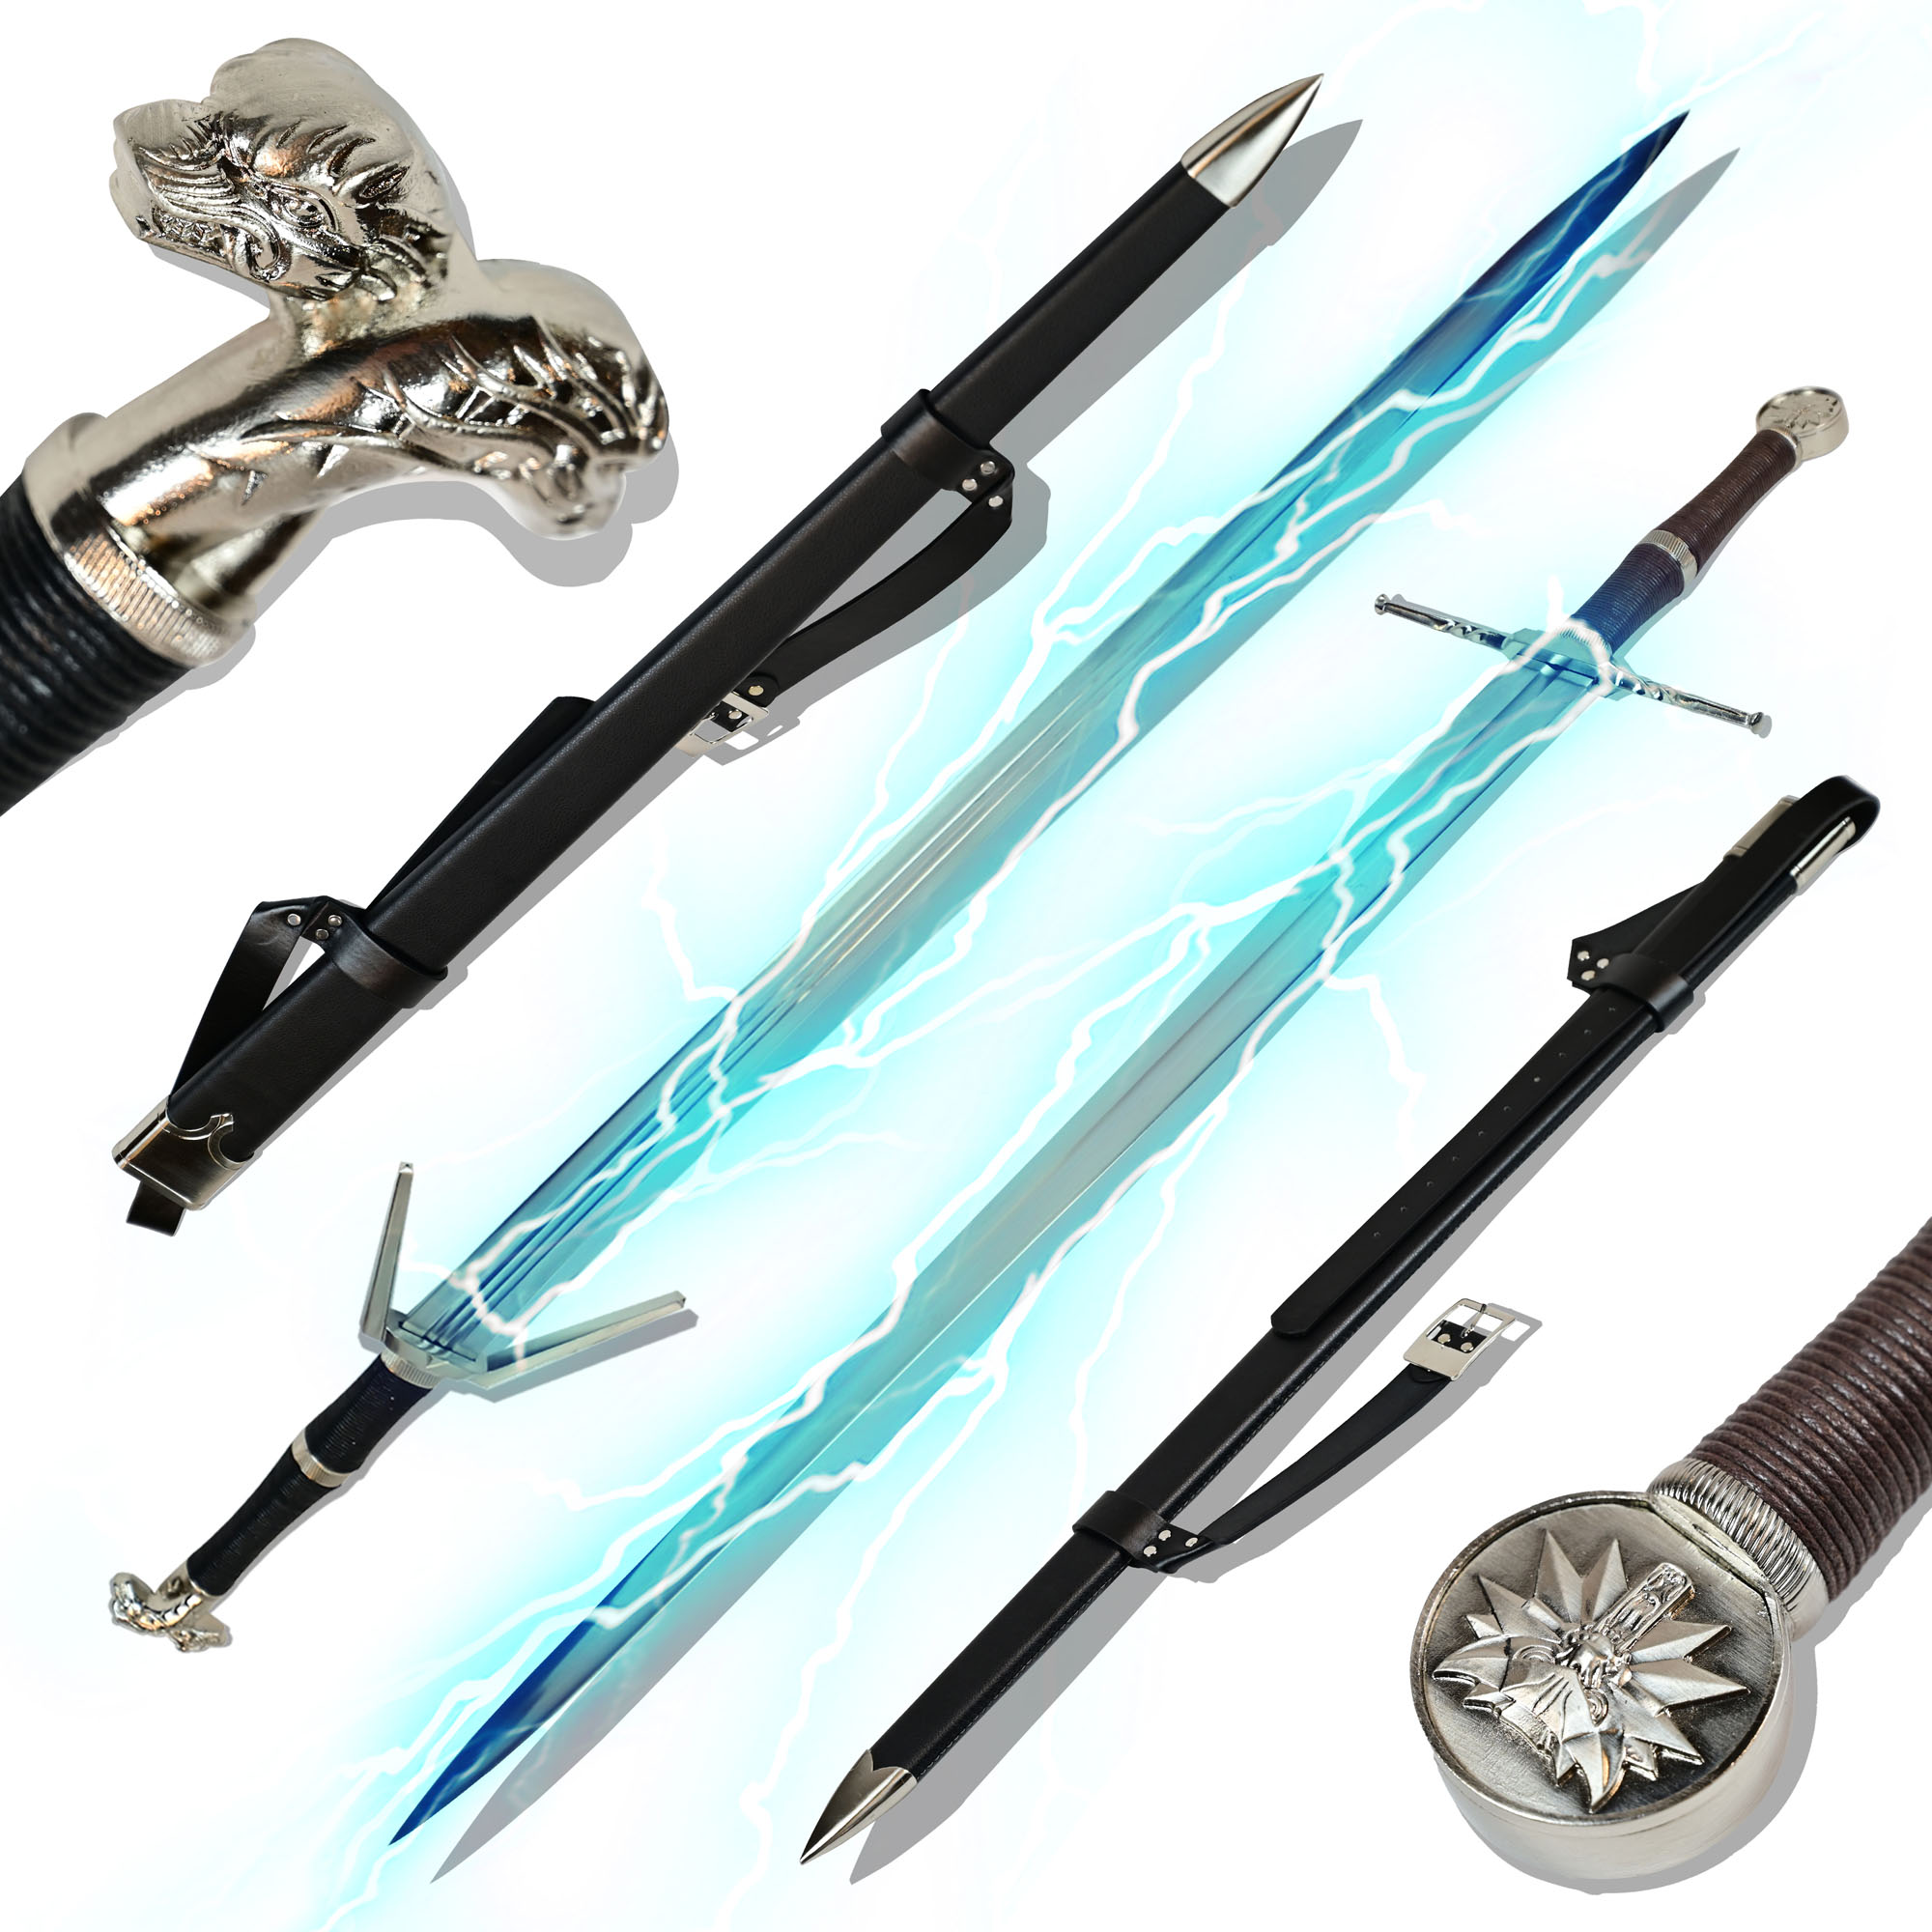 The Witcher Sword Set - Silver + Steel Sword (Bundle of 40660 and 40659)